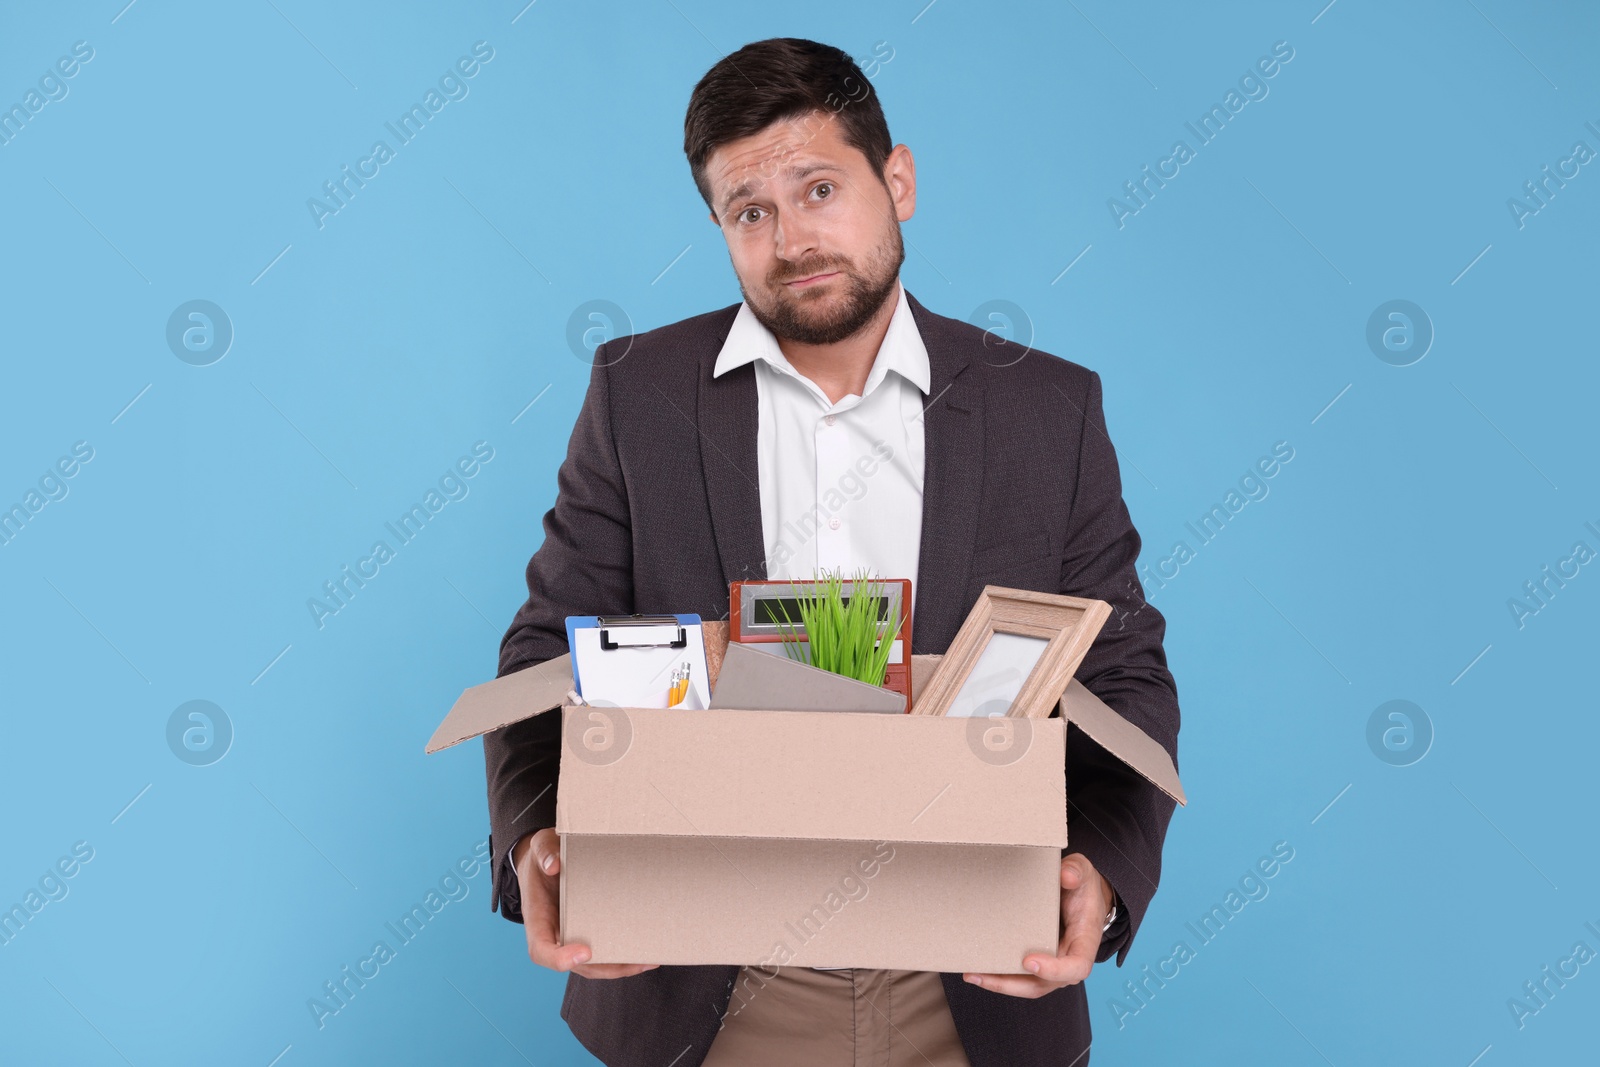 Photo of Unemployed man with box of personal office belongings on light blue background